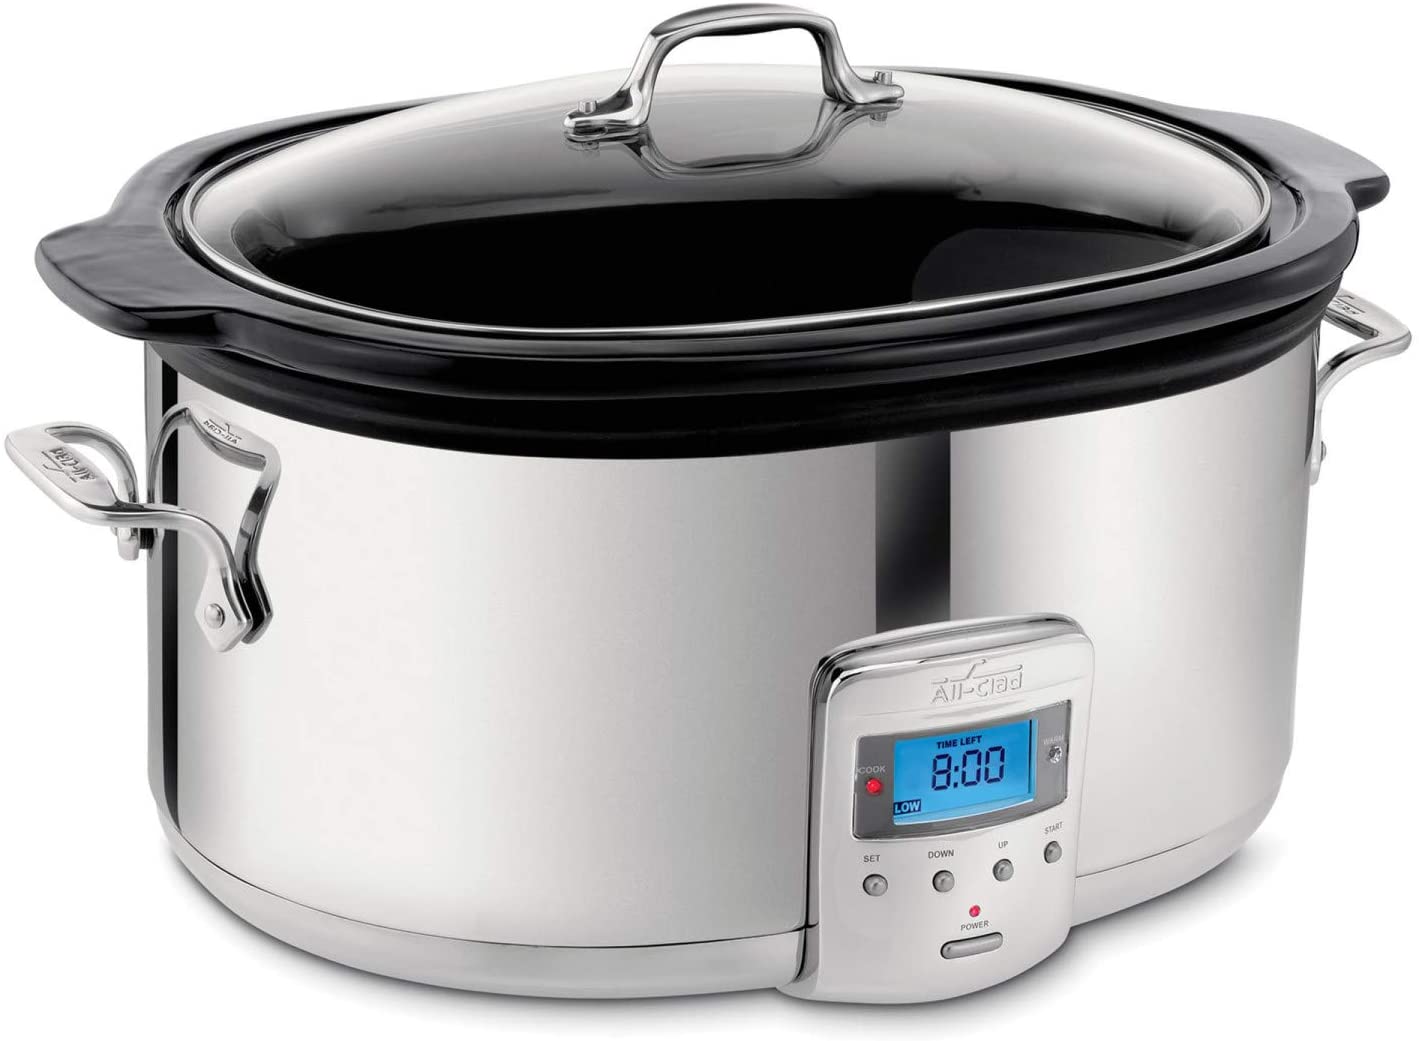 All-Clad Programmable Oval-Shaped Slow Cooker 